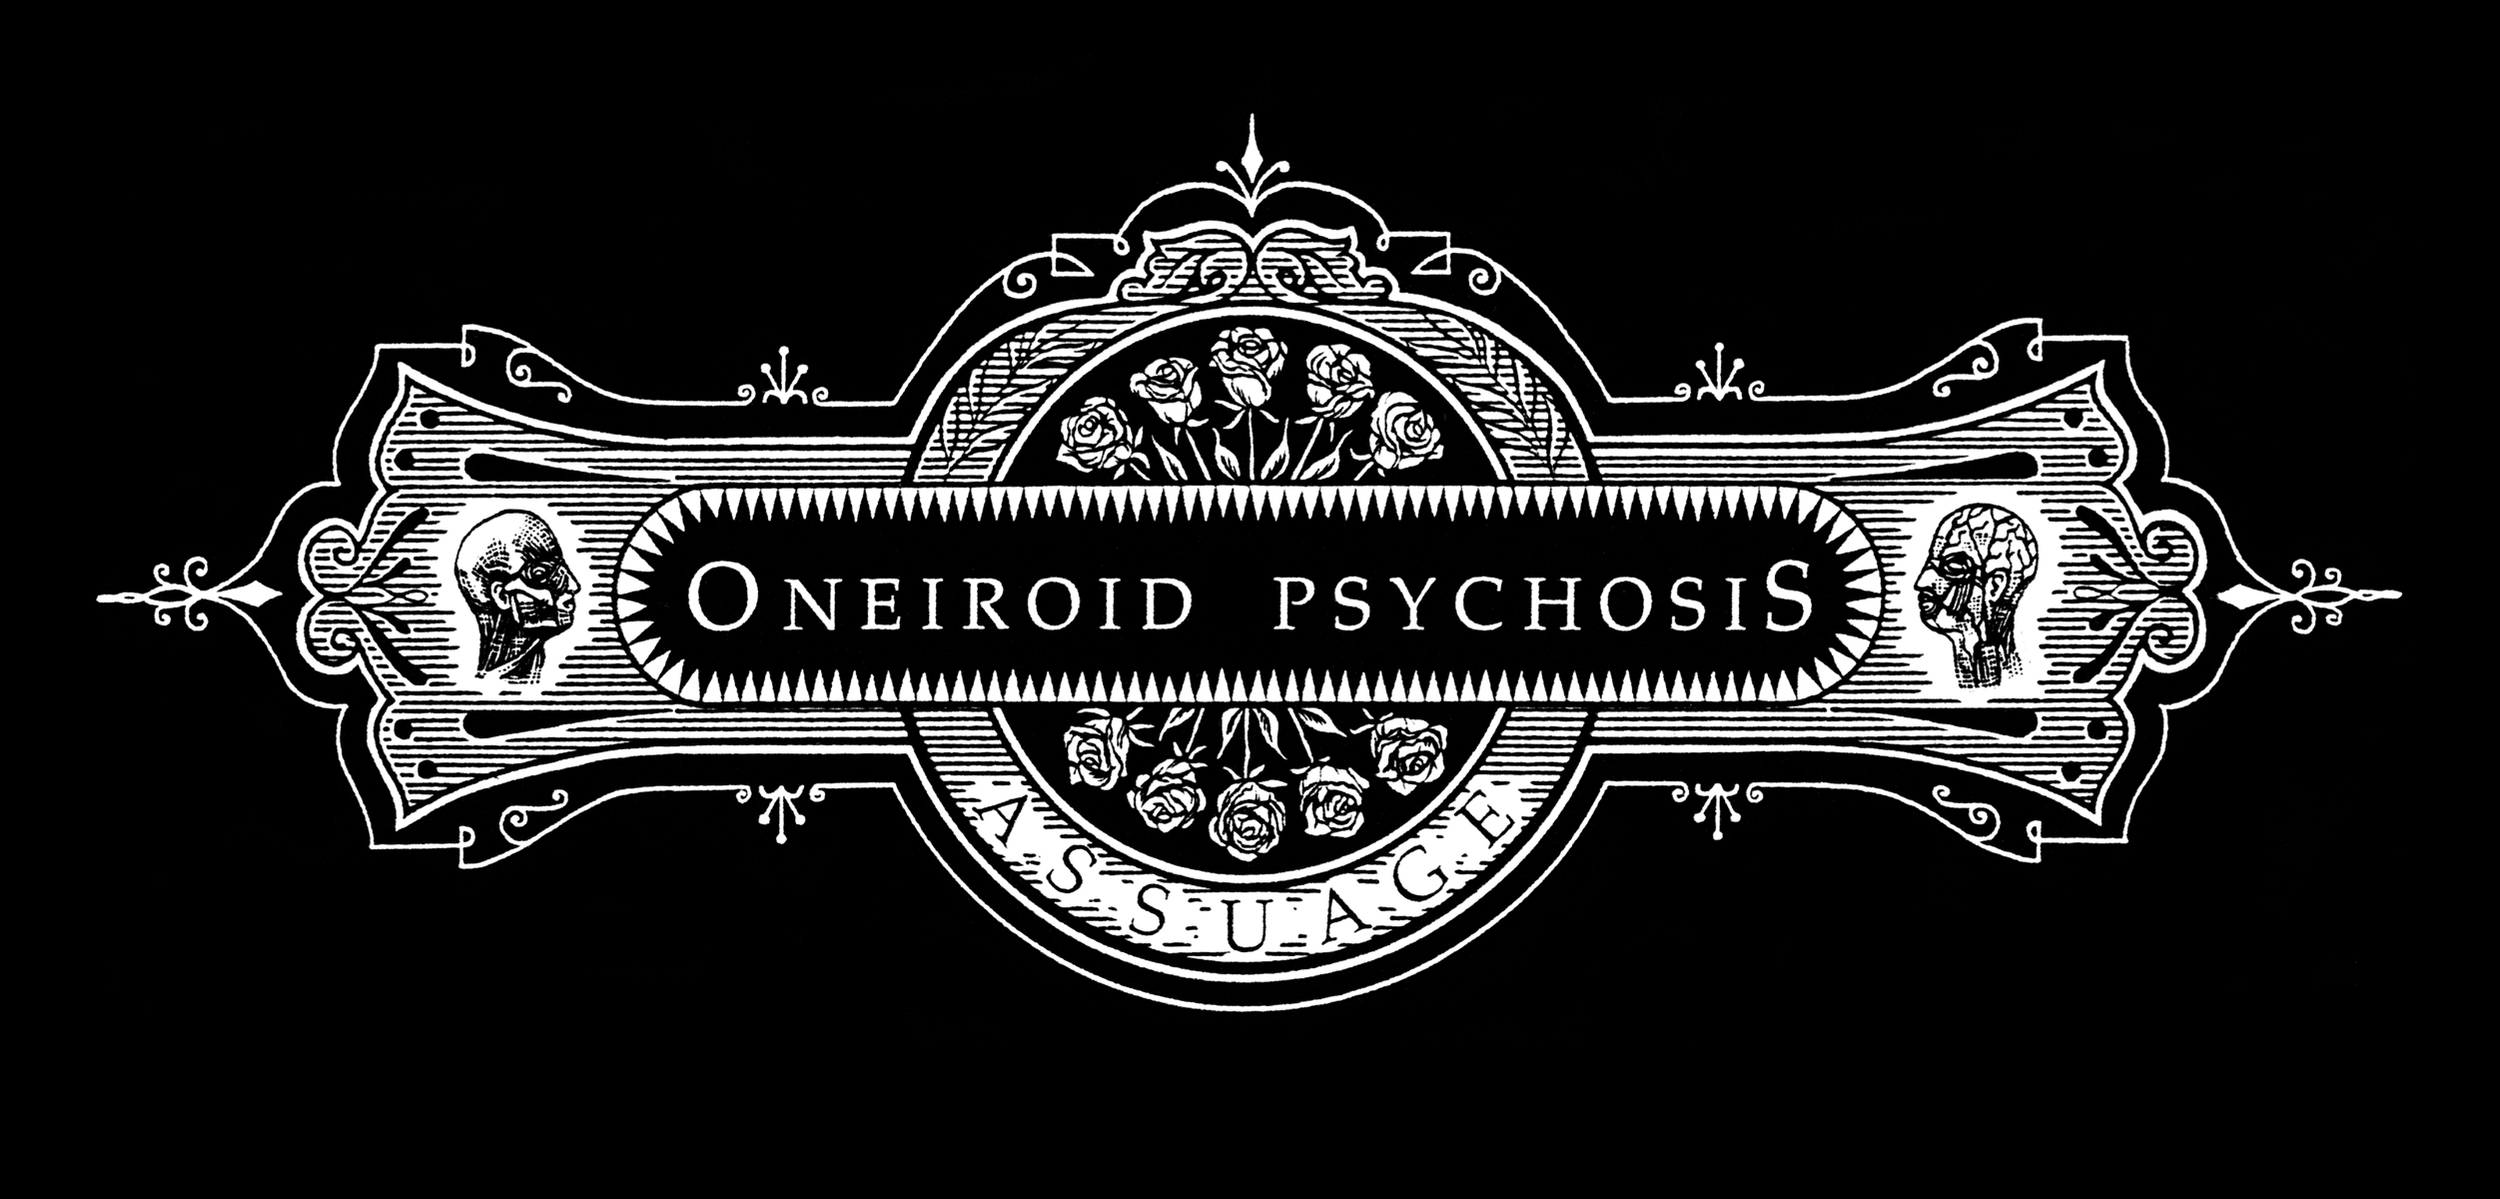   Oneiroid Psychosis,  Assuage . Title frame for CD single.  1996. Pen and ink, Scratch board. 